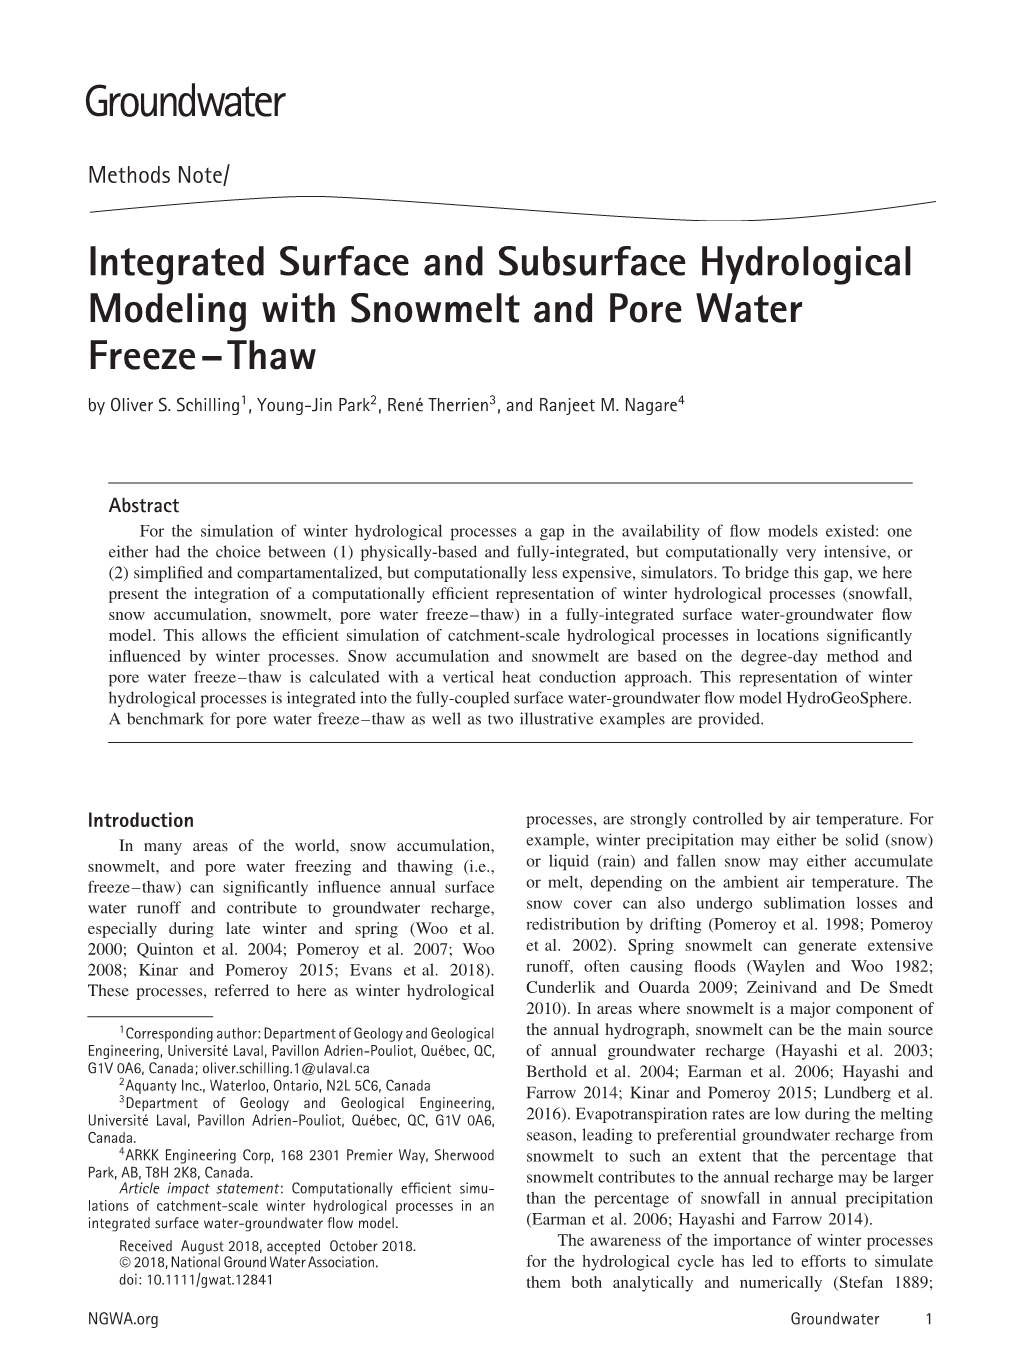 Integrated Surface and Subsurface Hydrological Modeling with Snowmelt and Pore Water Freeze–Thaw by Oliver S